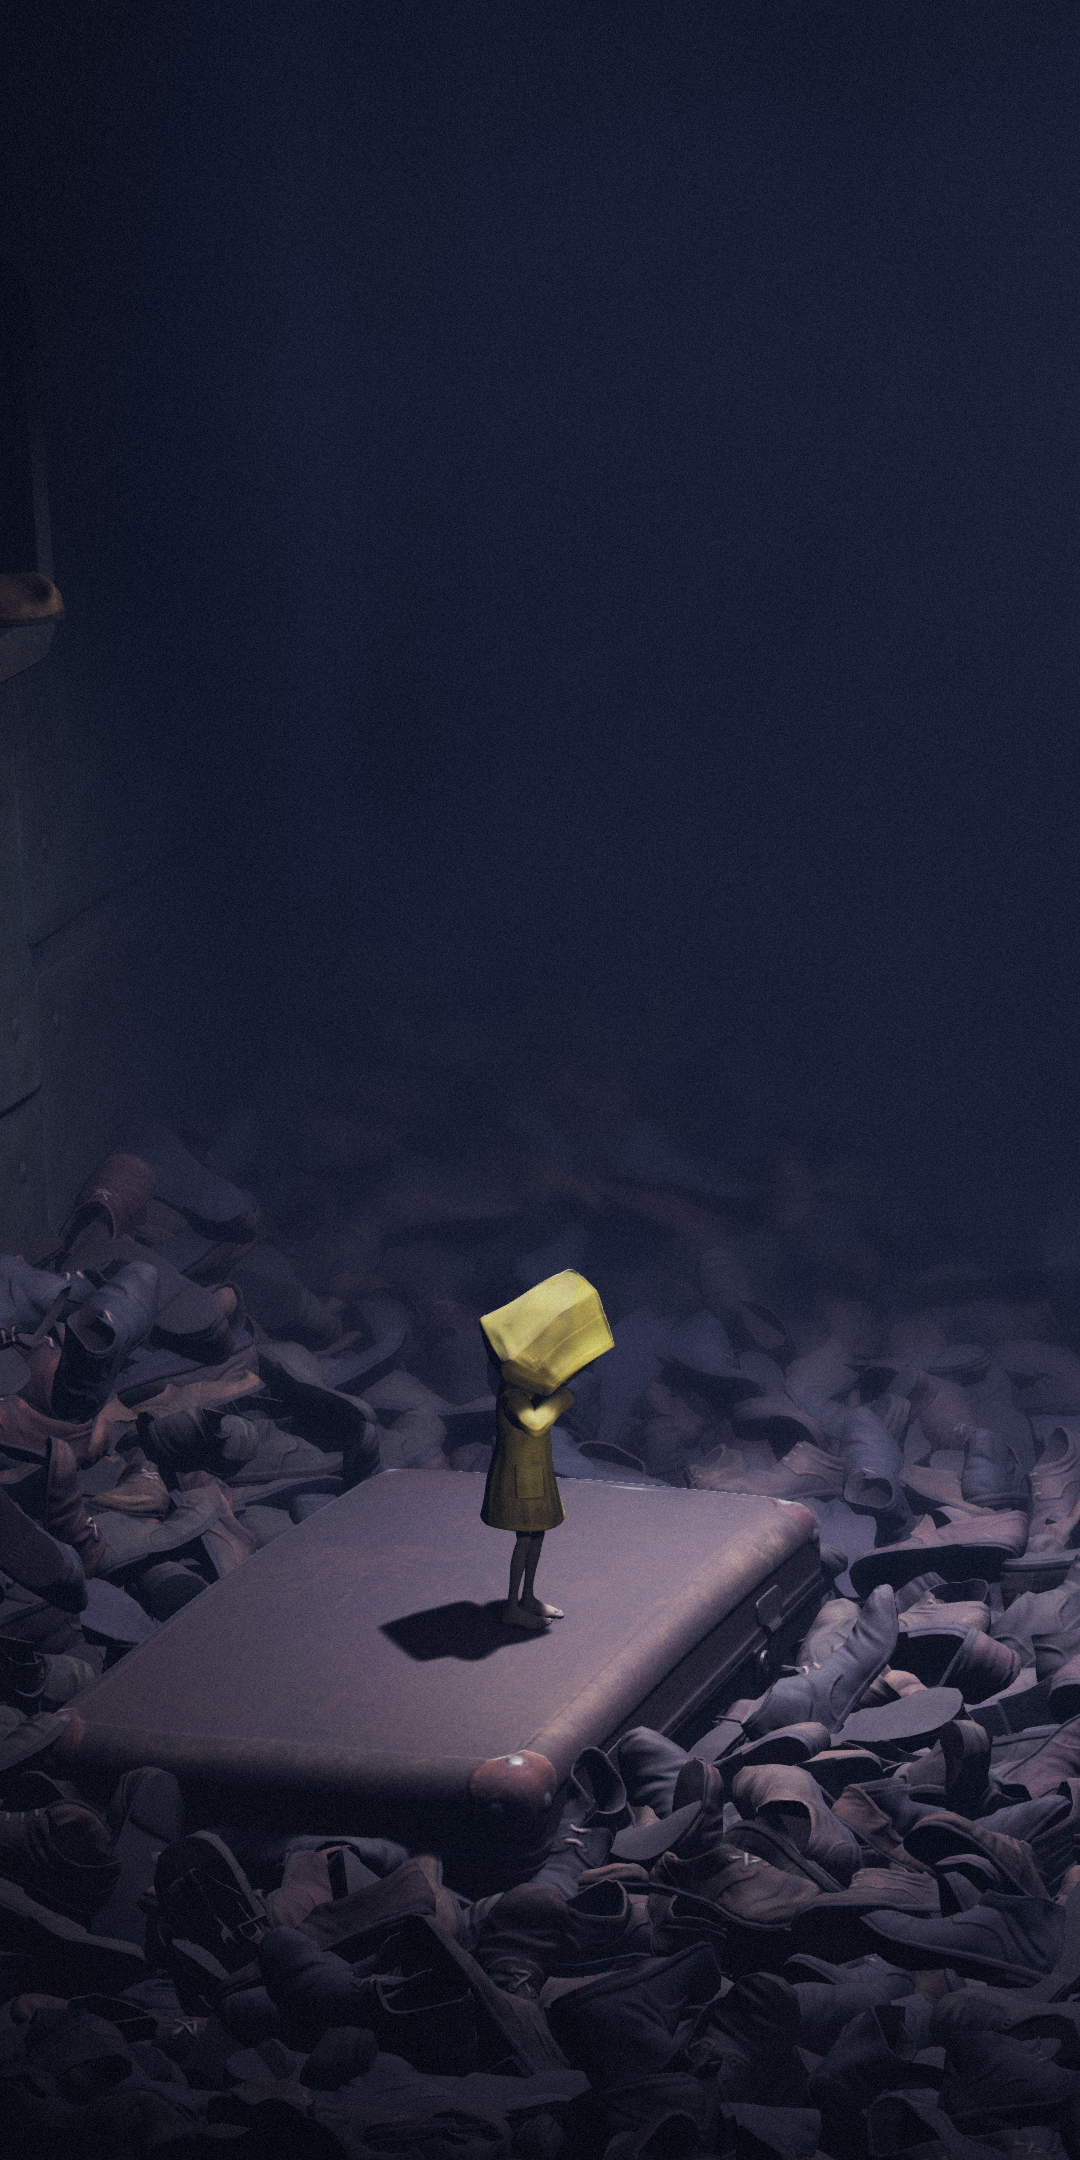 Little Nightmares Phone Wallpaper - Mobile Abyss